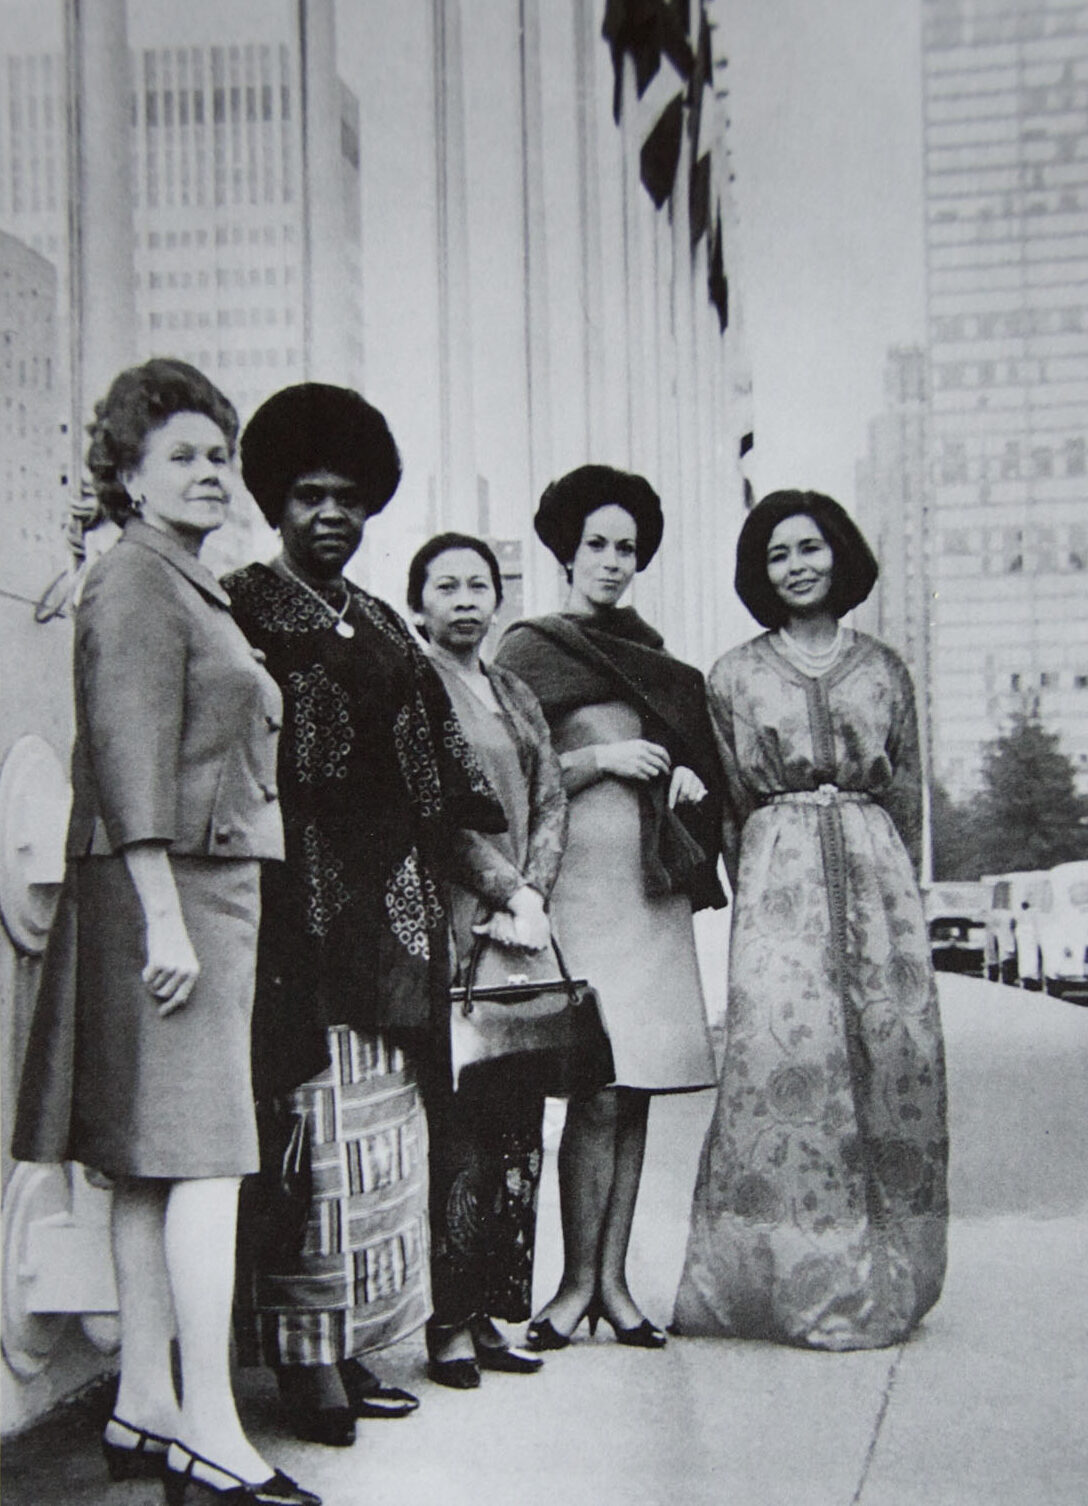 A group of women Ambassadors stand outside the UN